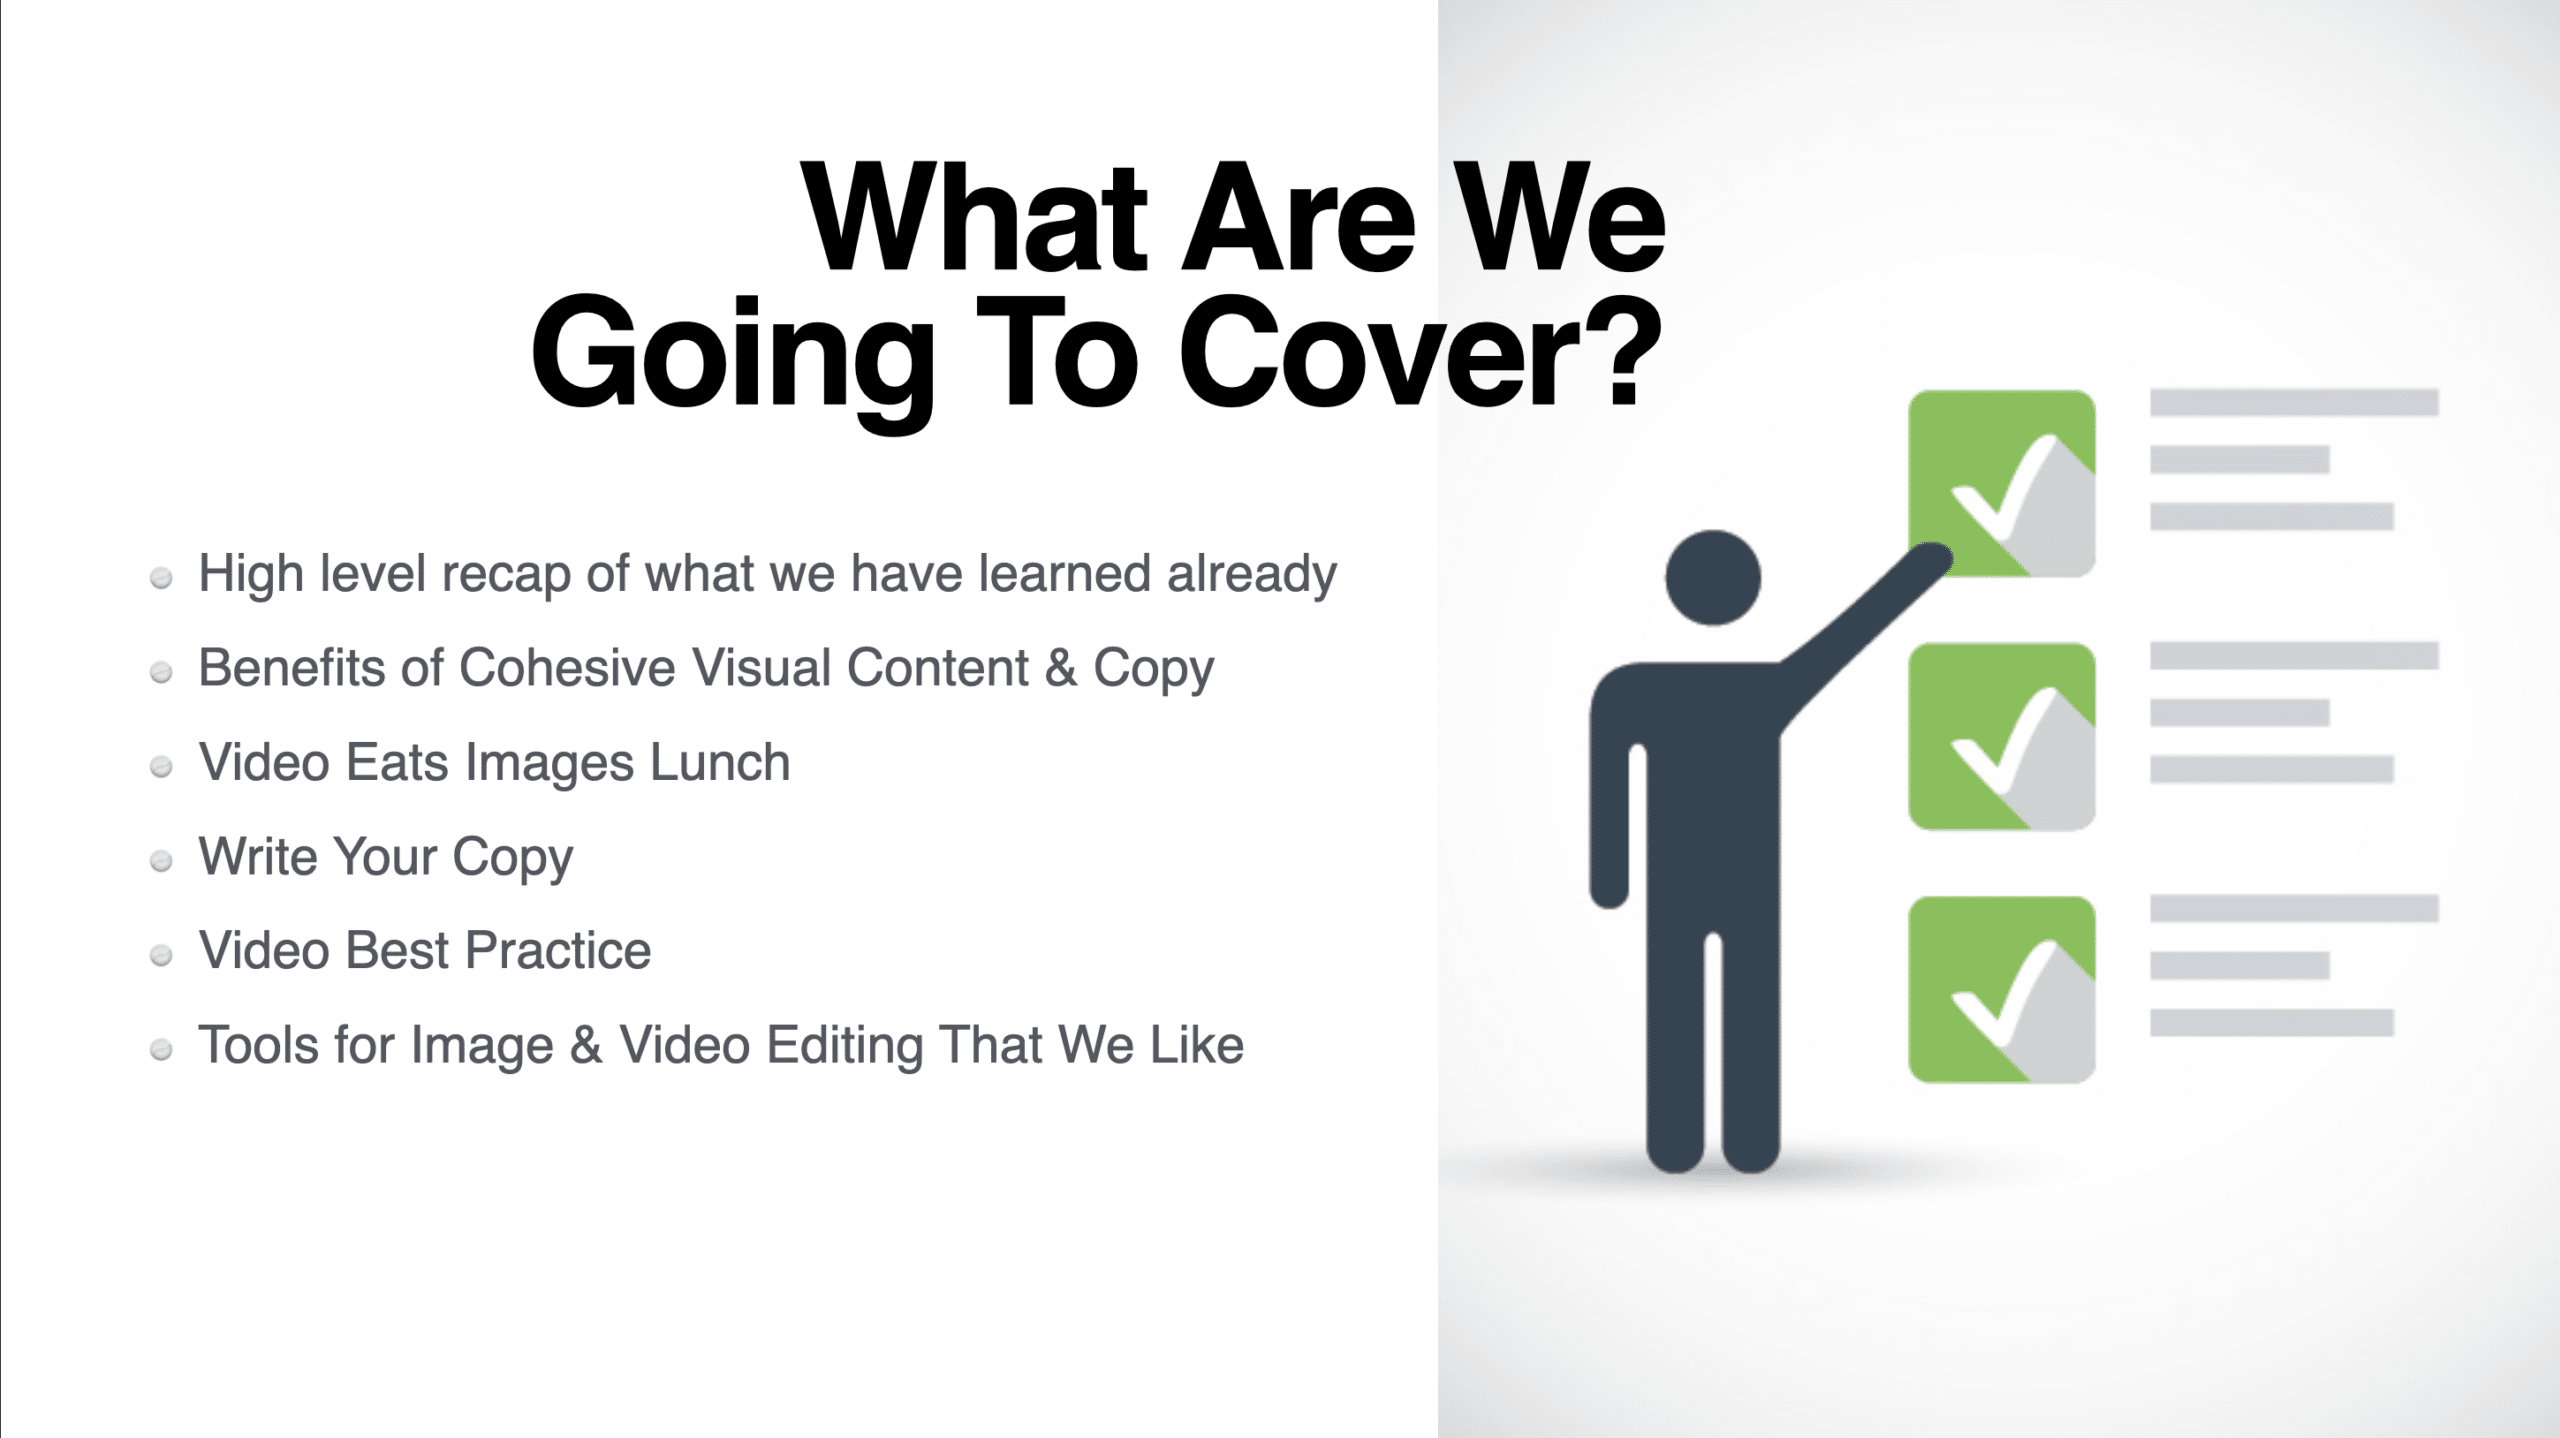 Copy and Visual Content